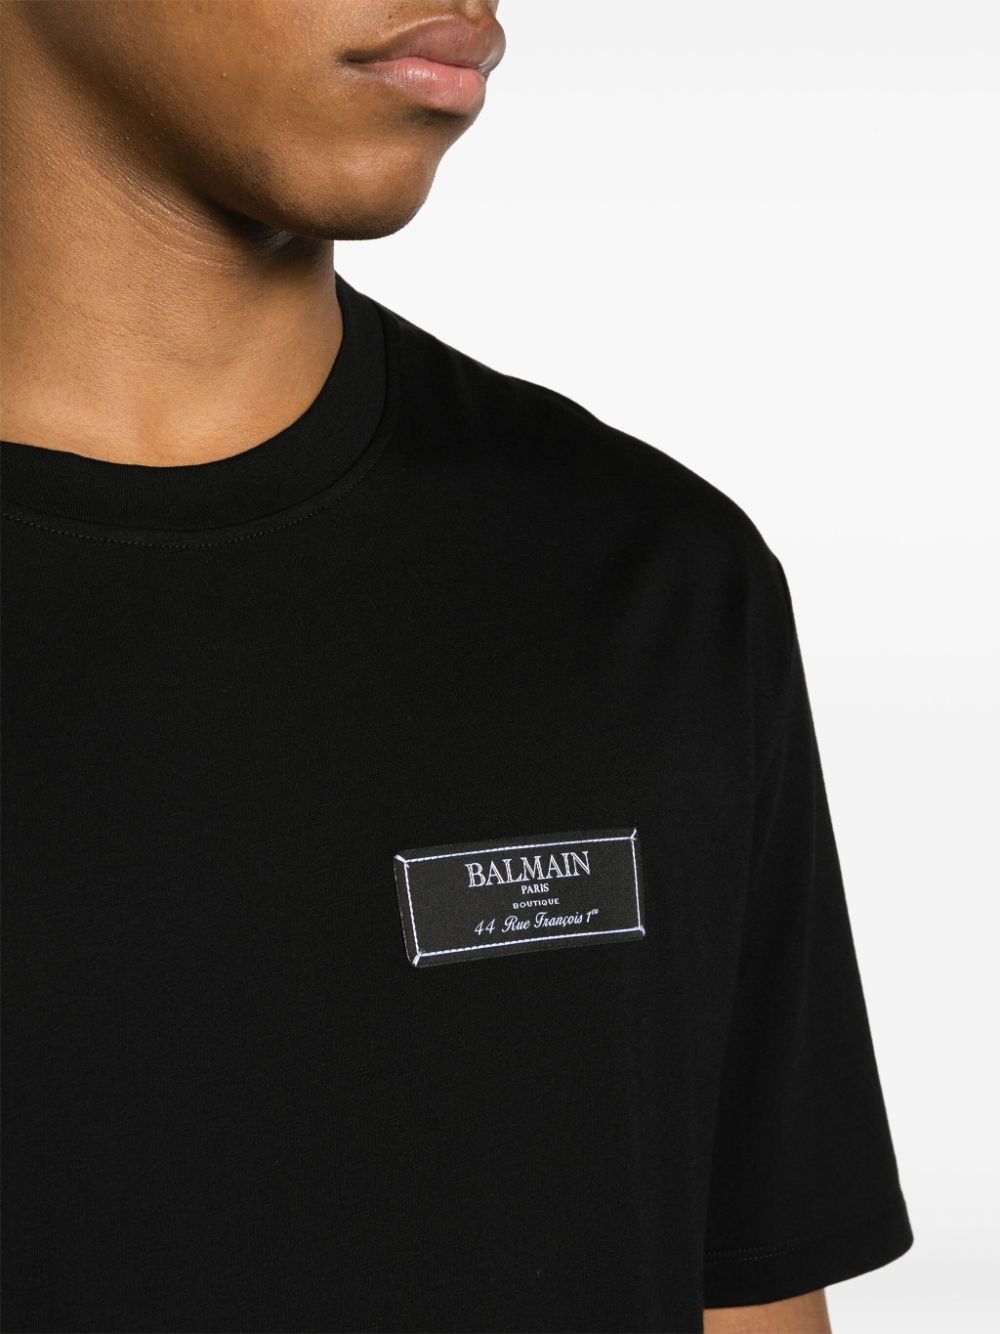 T-shirt with label